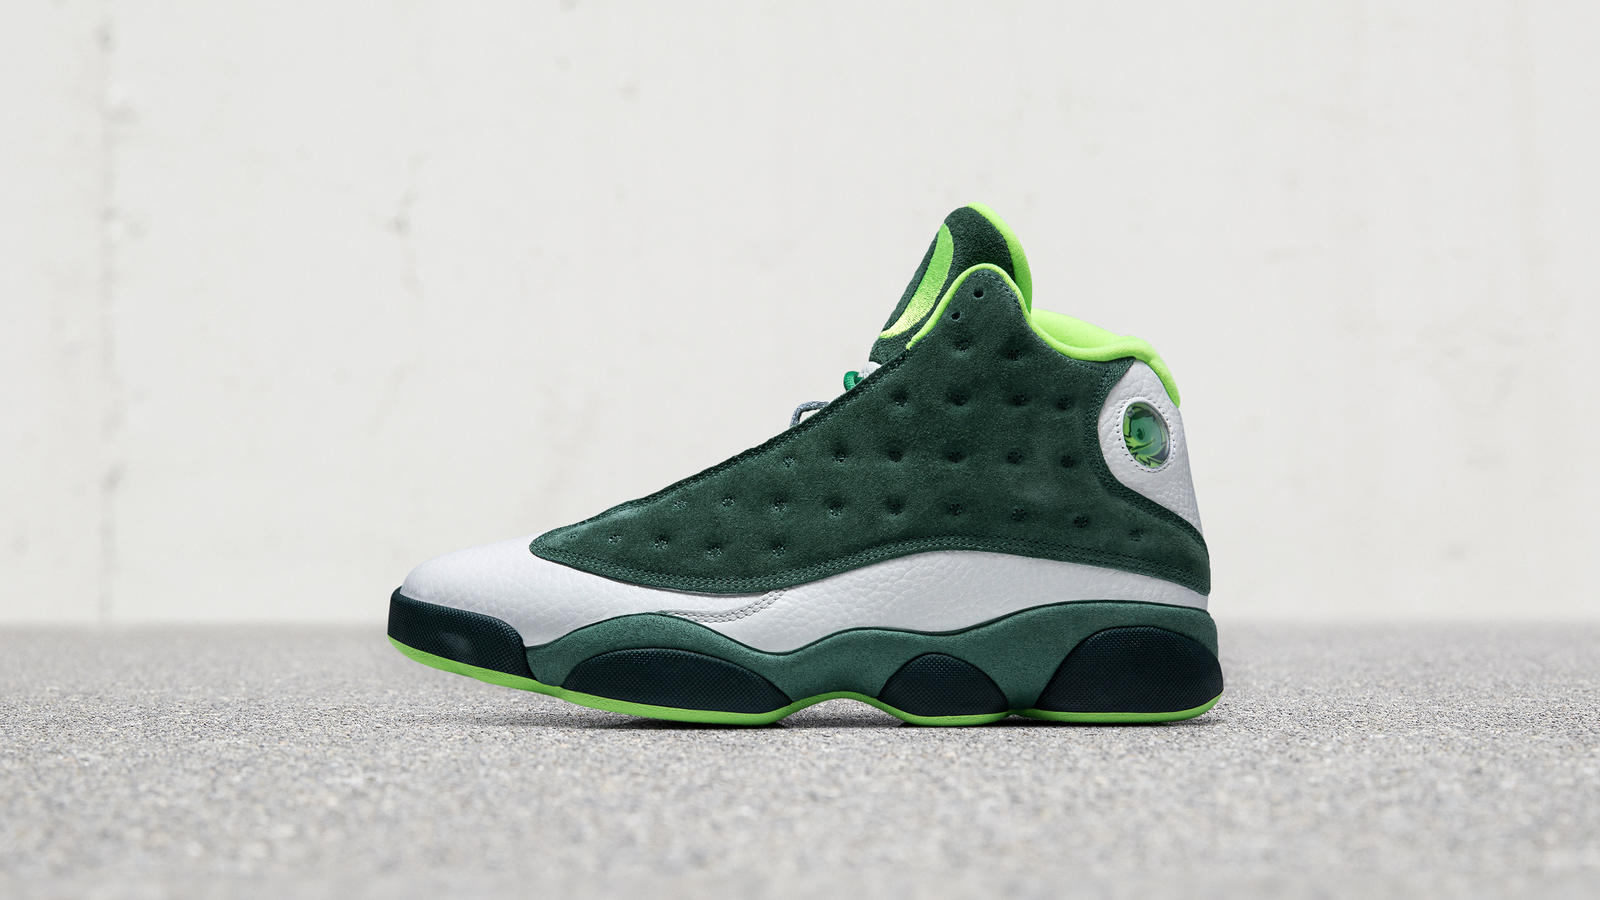 air jordan 13 univeristy of oregon duck friends and family 1